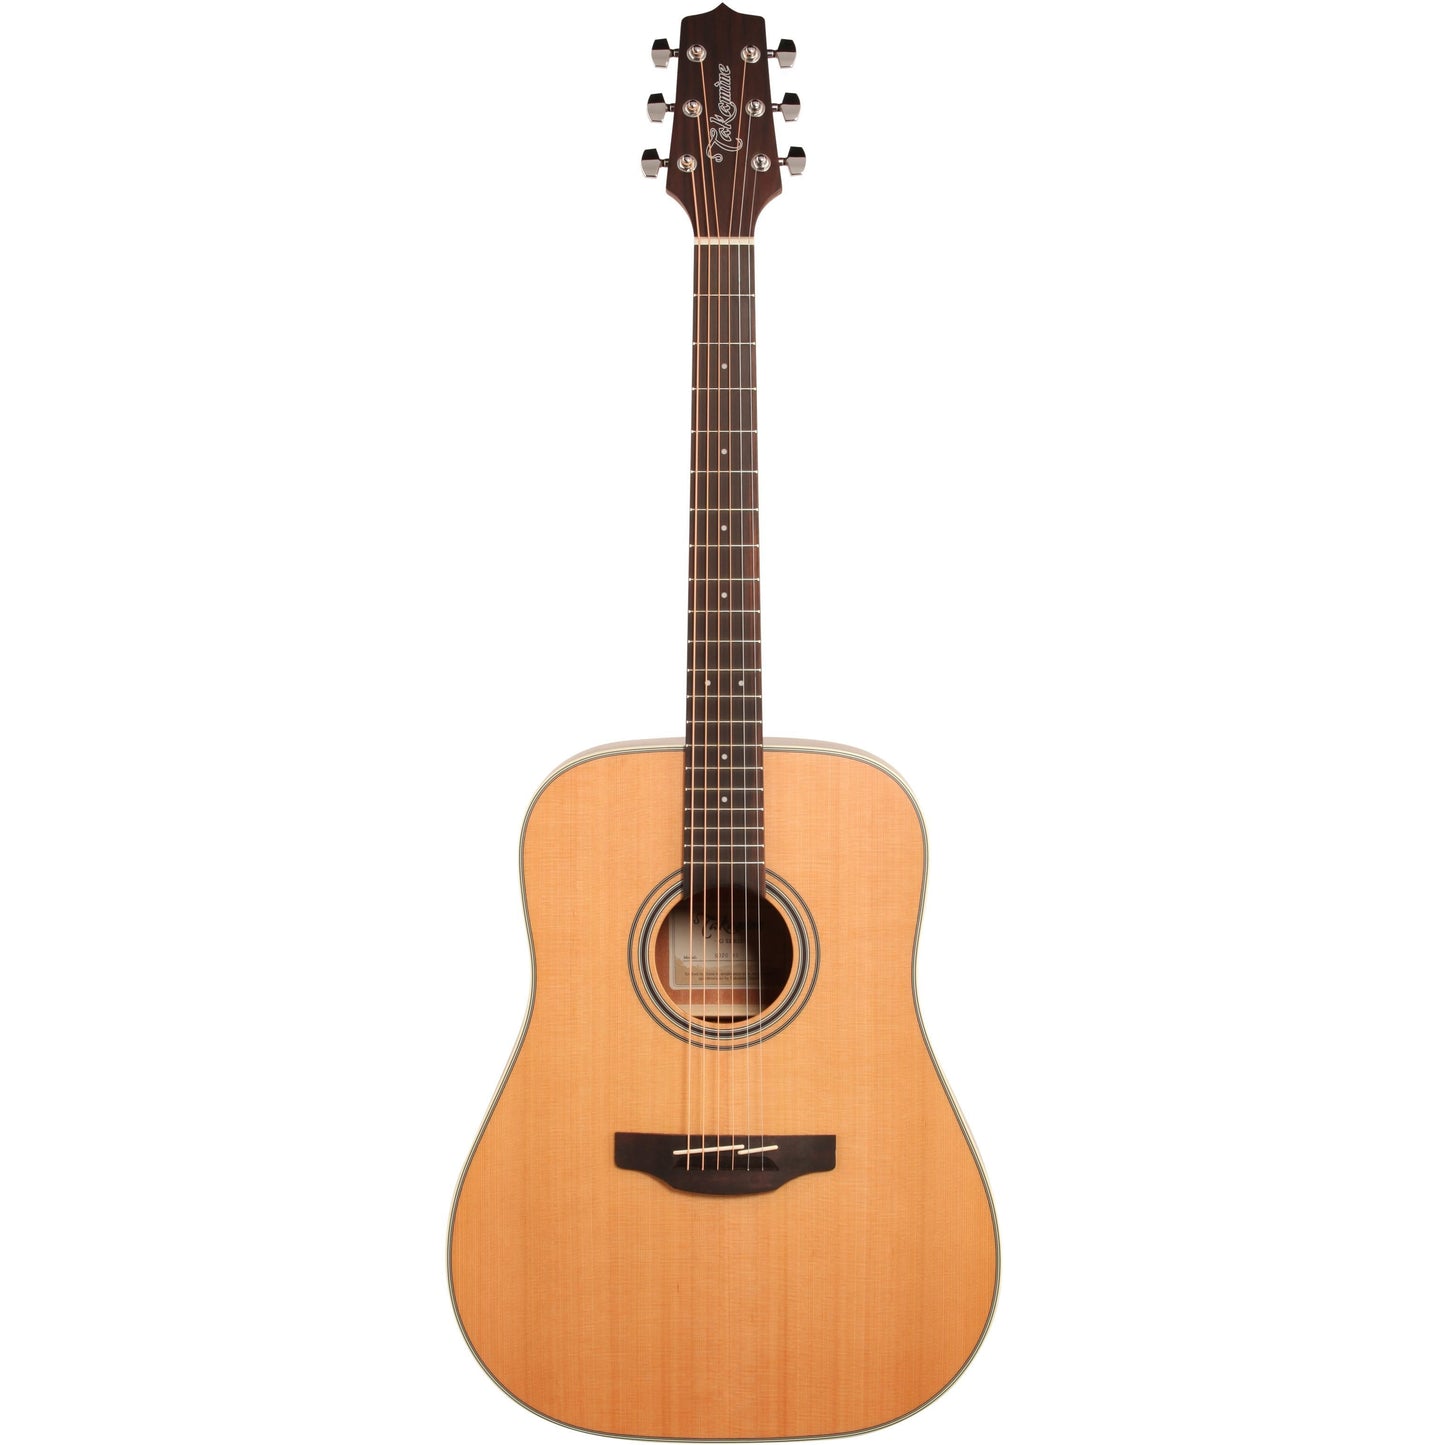 Takamine GD20 Dreadnought Acoustic Guitar, Natural